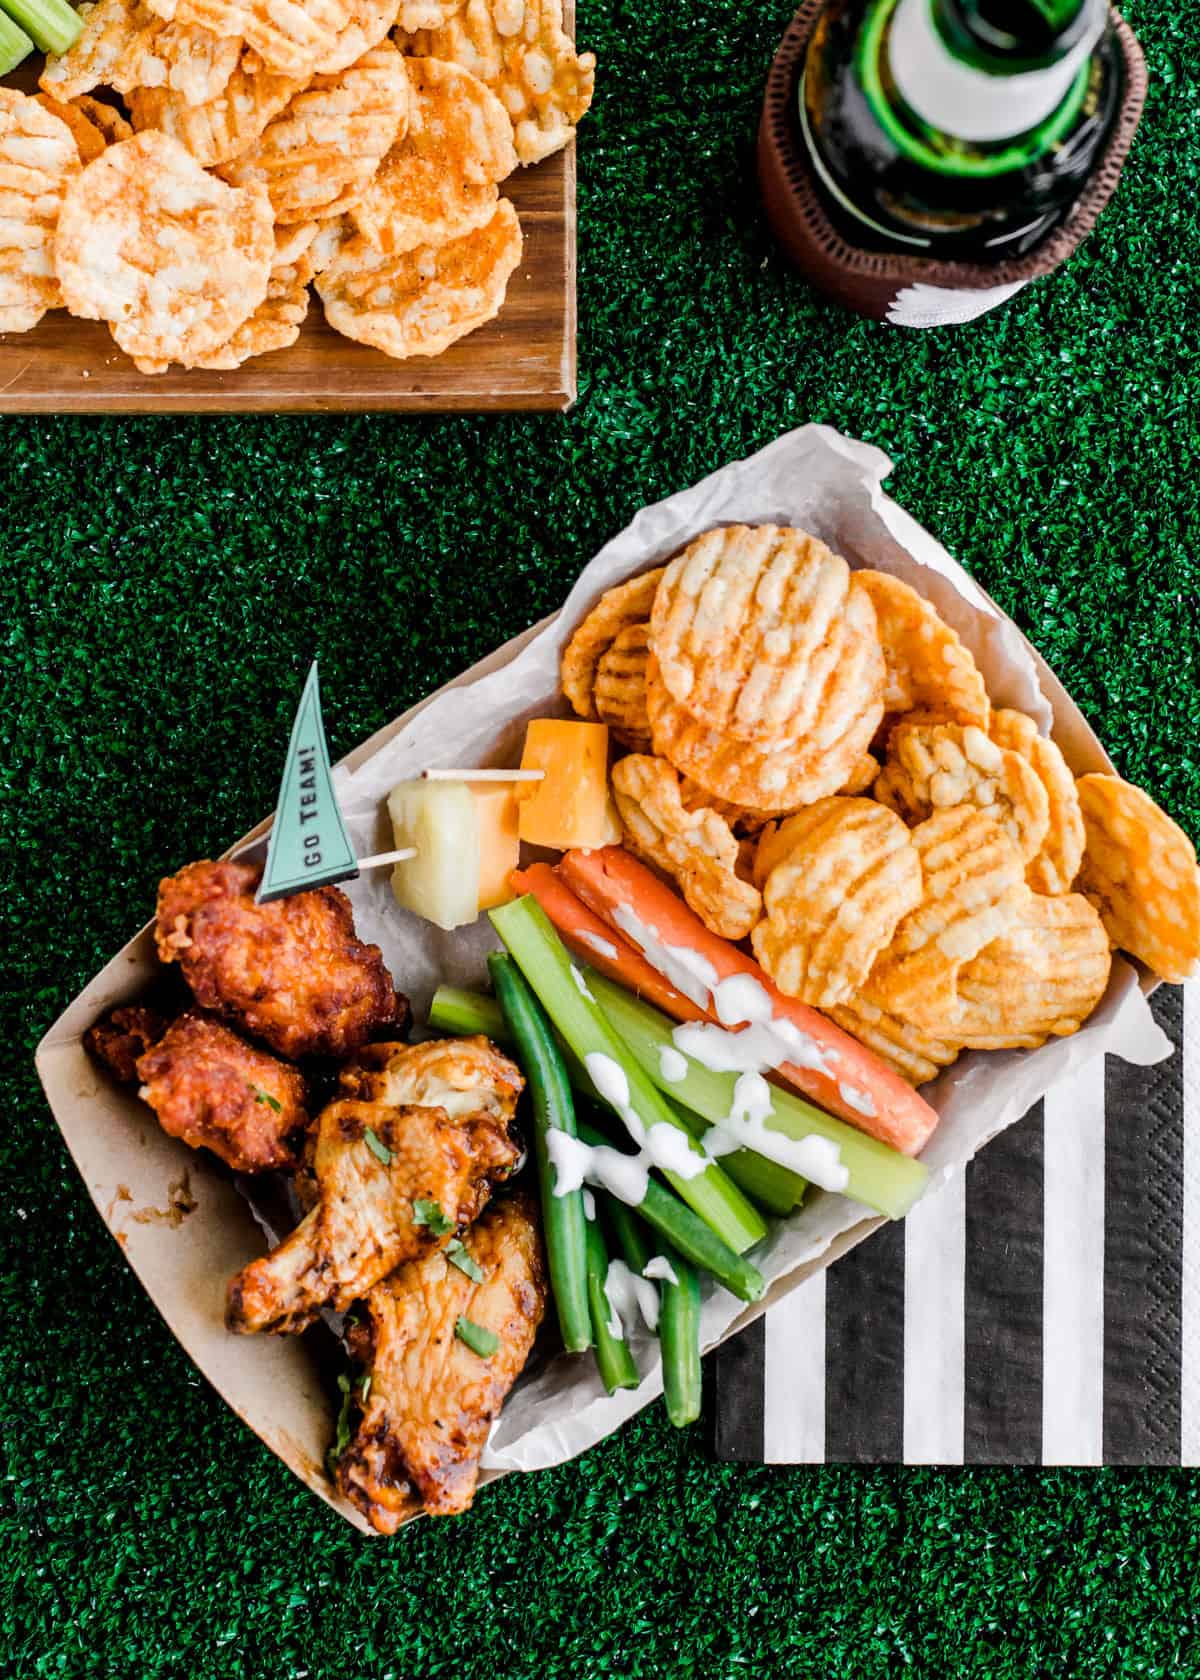 paper snack tray filled with vegetable sticks, chicken wings, and potato chips, on green turf grass background.